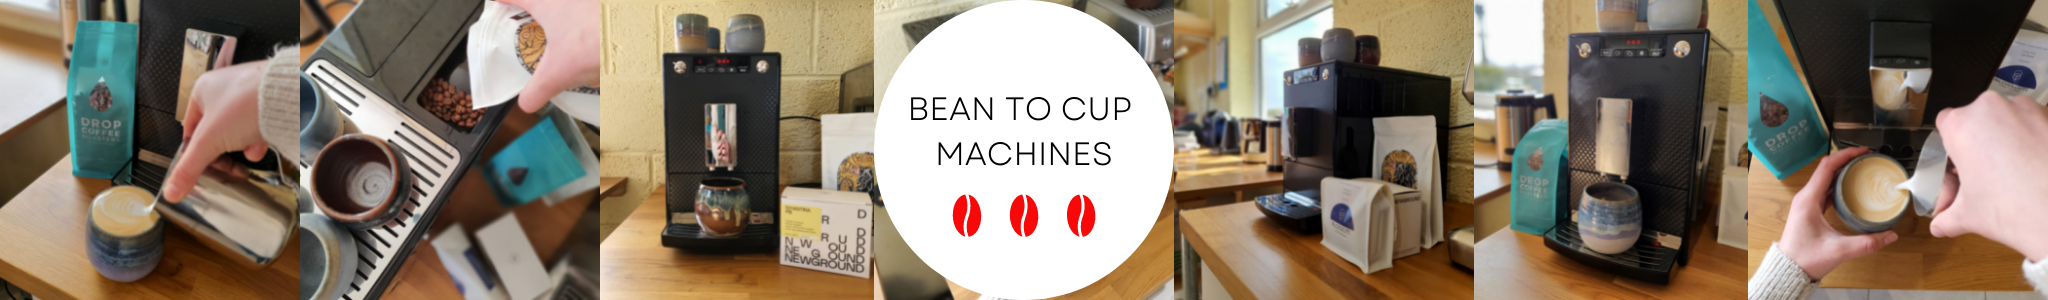 Why should you buy a bean to cup machine?